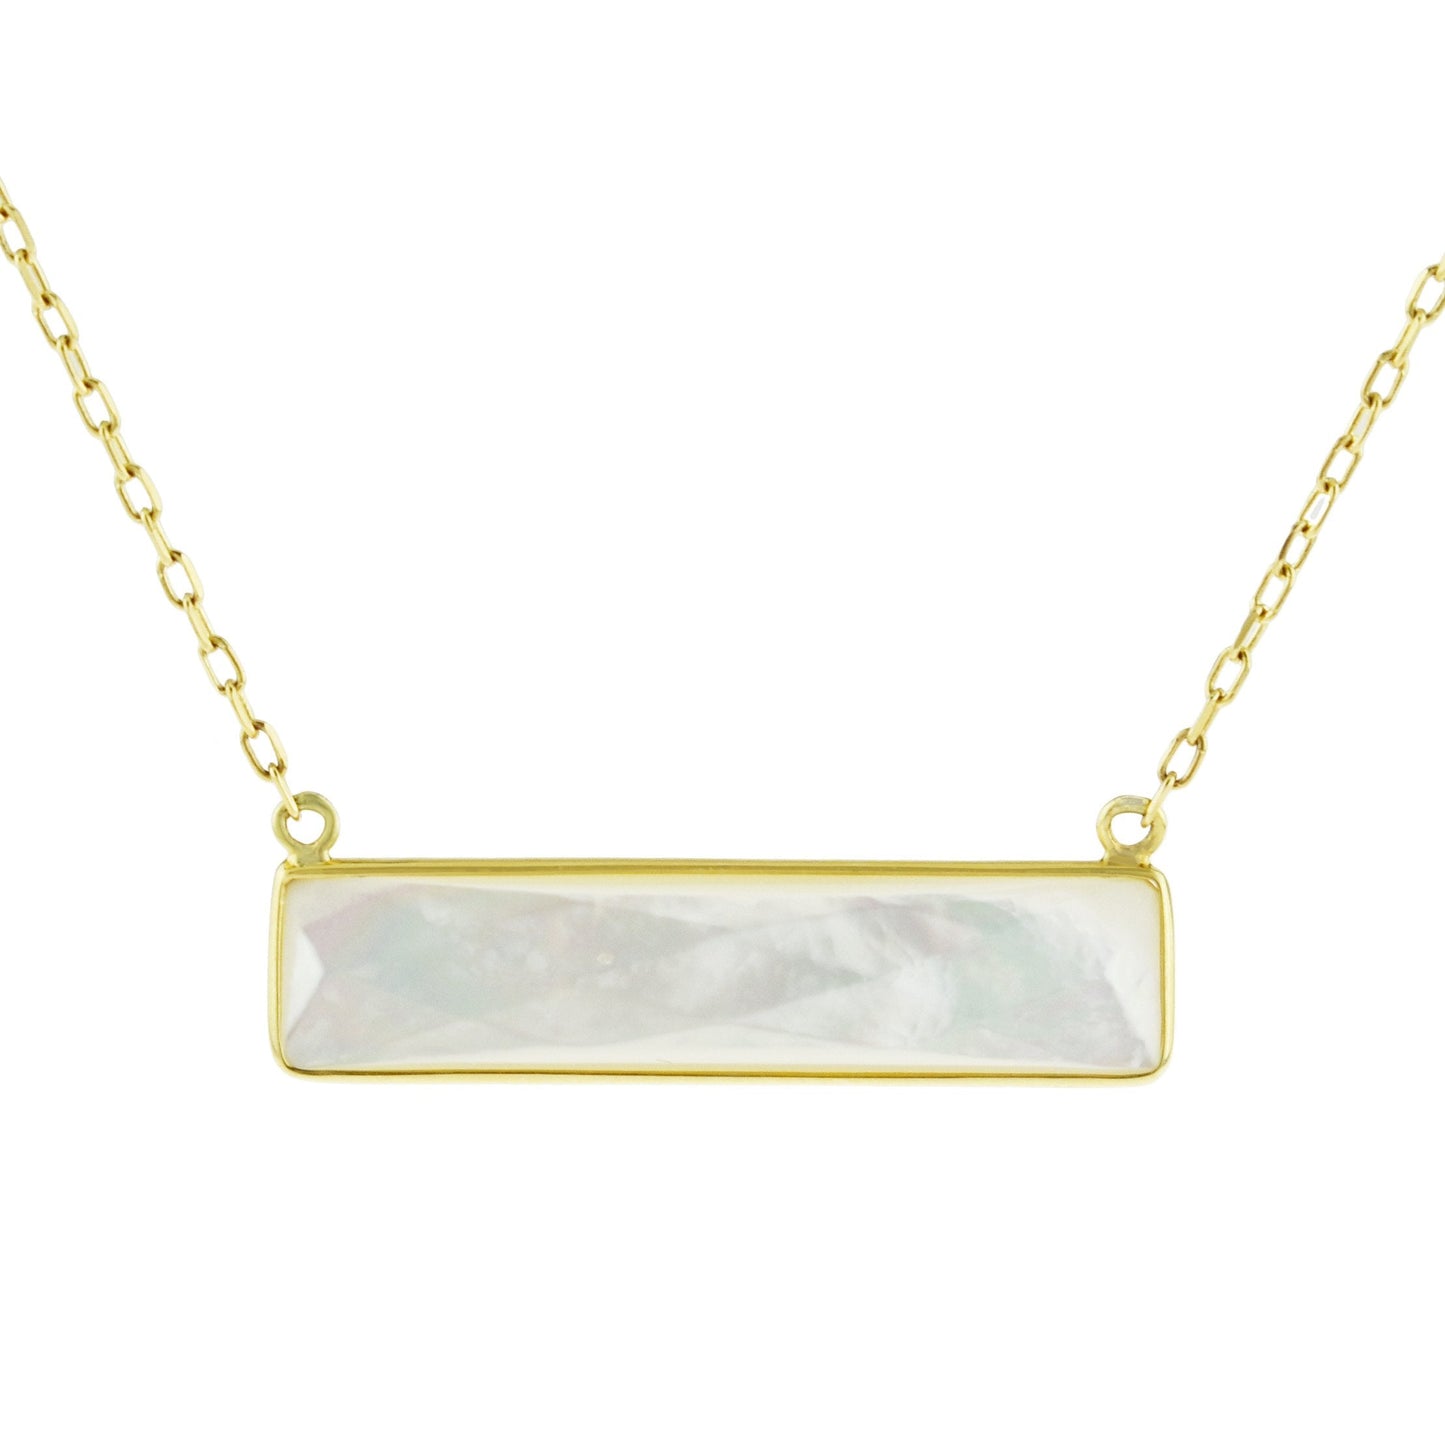 14k Mother of Pearl Rectangle Bezel Center Necklace 18"